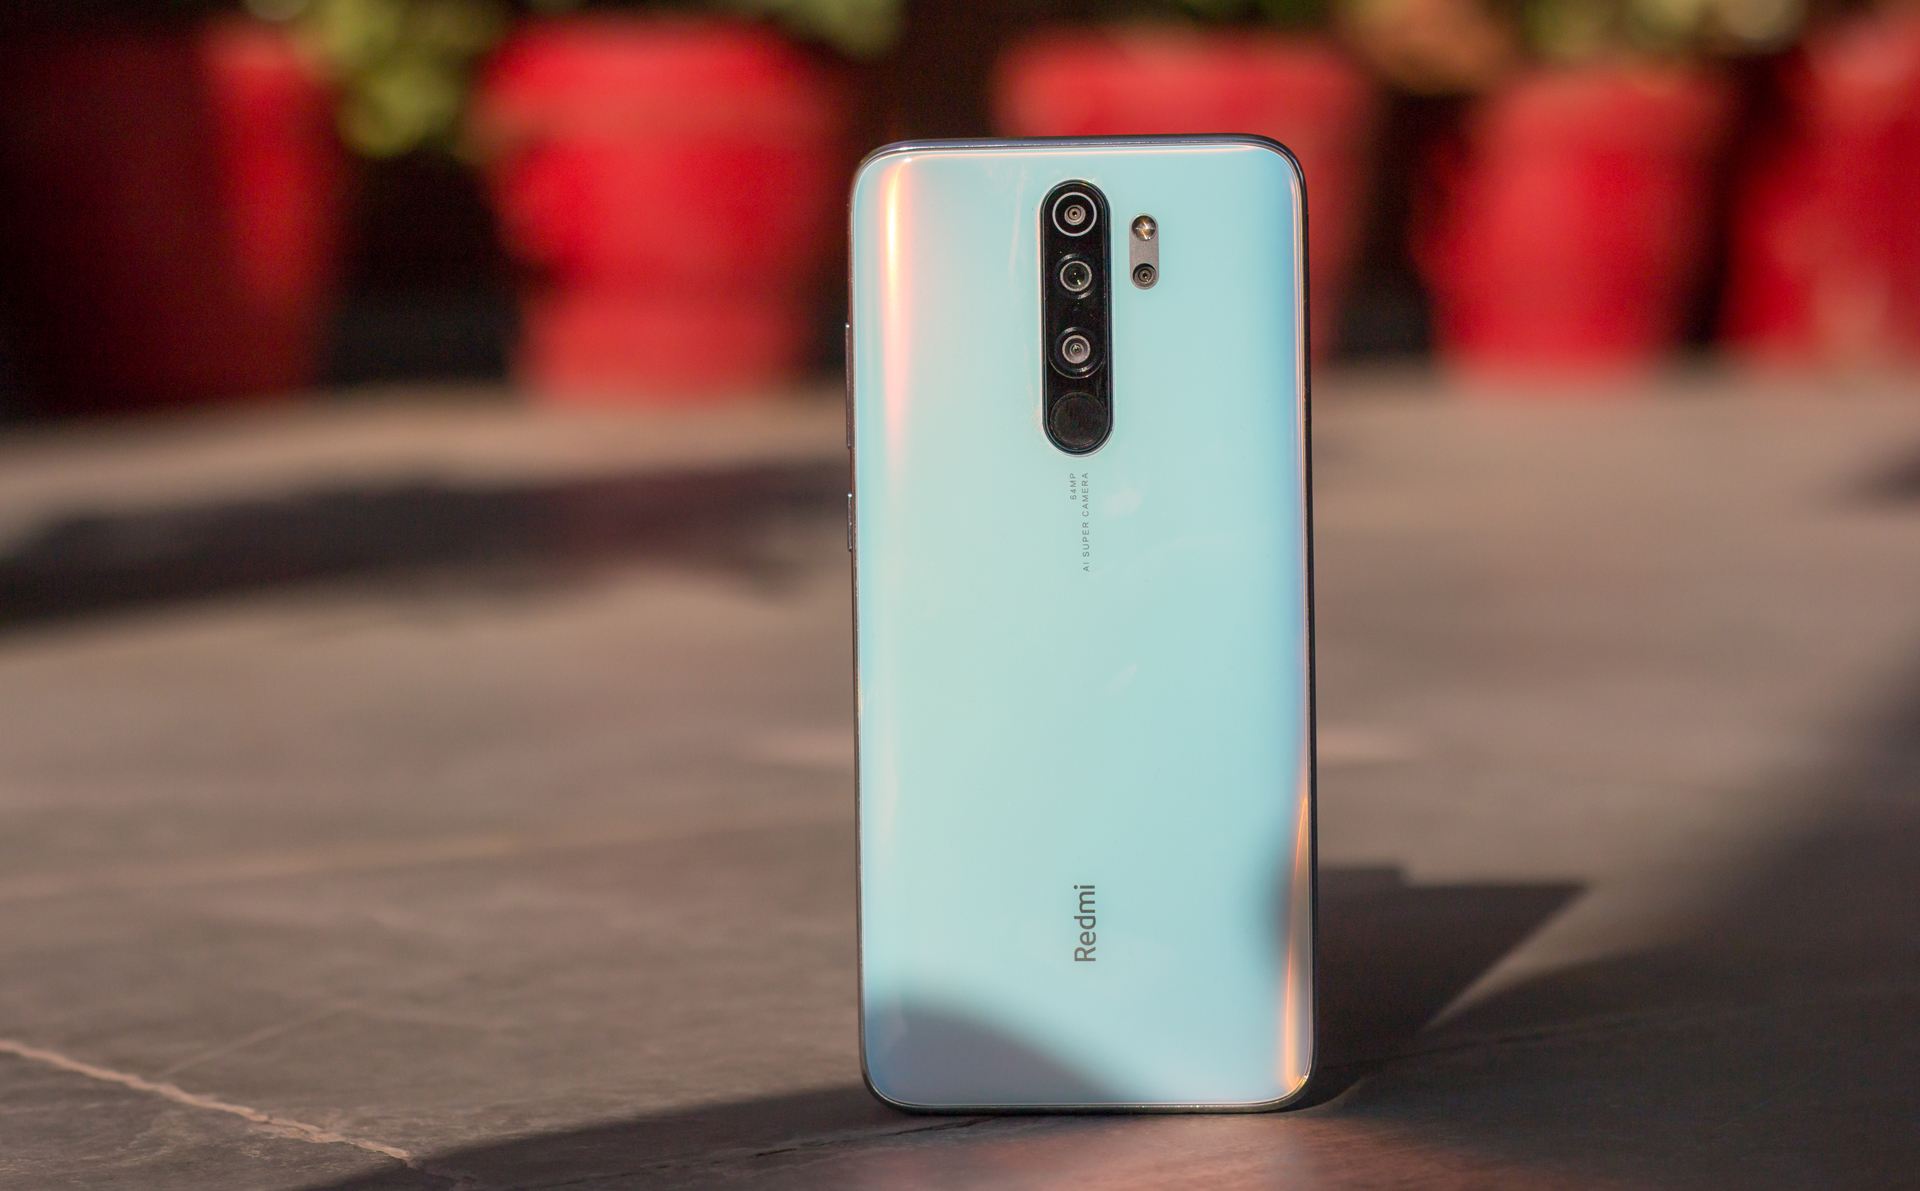 Xiaomi Redmi Note 8 Pro Review with Pros and Cons